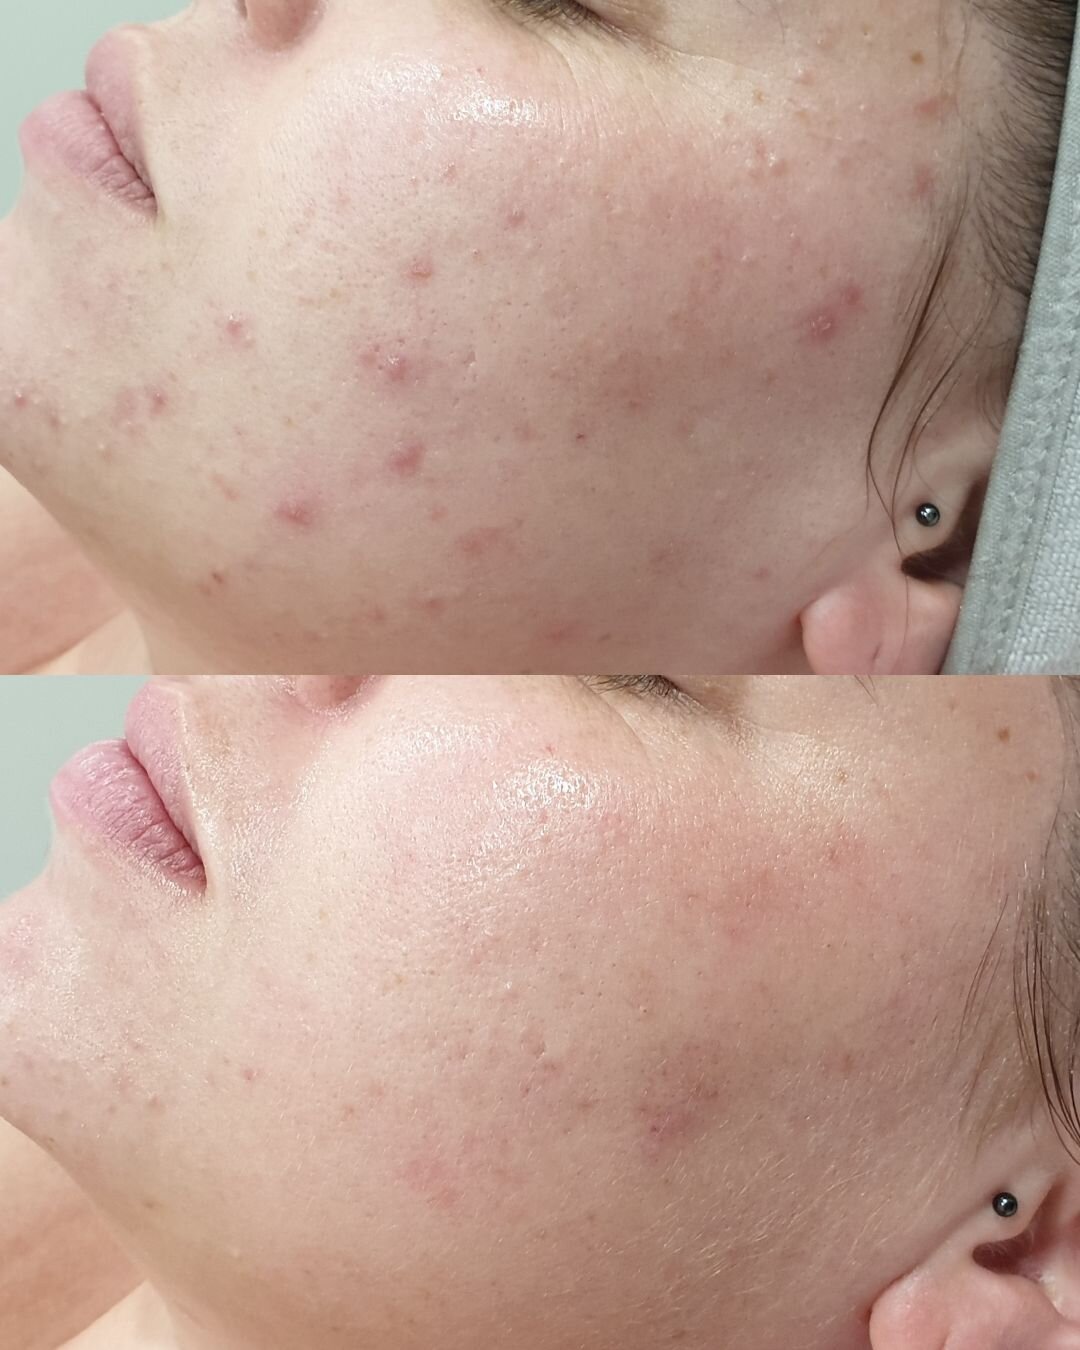 This is #progress 🙌

Our beautiful client originally came to us with compromised skin, concerned with congestion. Her journey started with Lymphatic Therapy to flush any toxins and increase nutrient absorption to begin healing and strengthening the 